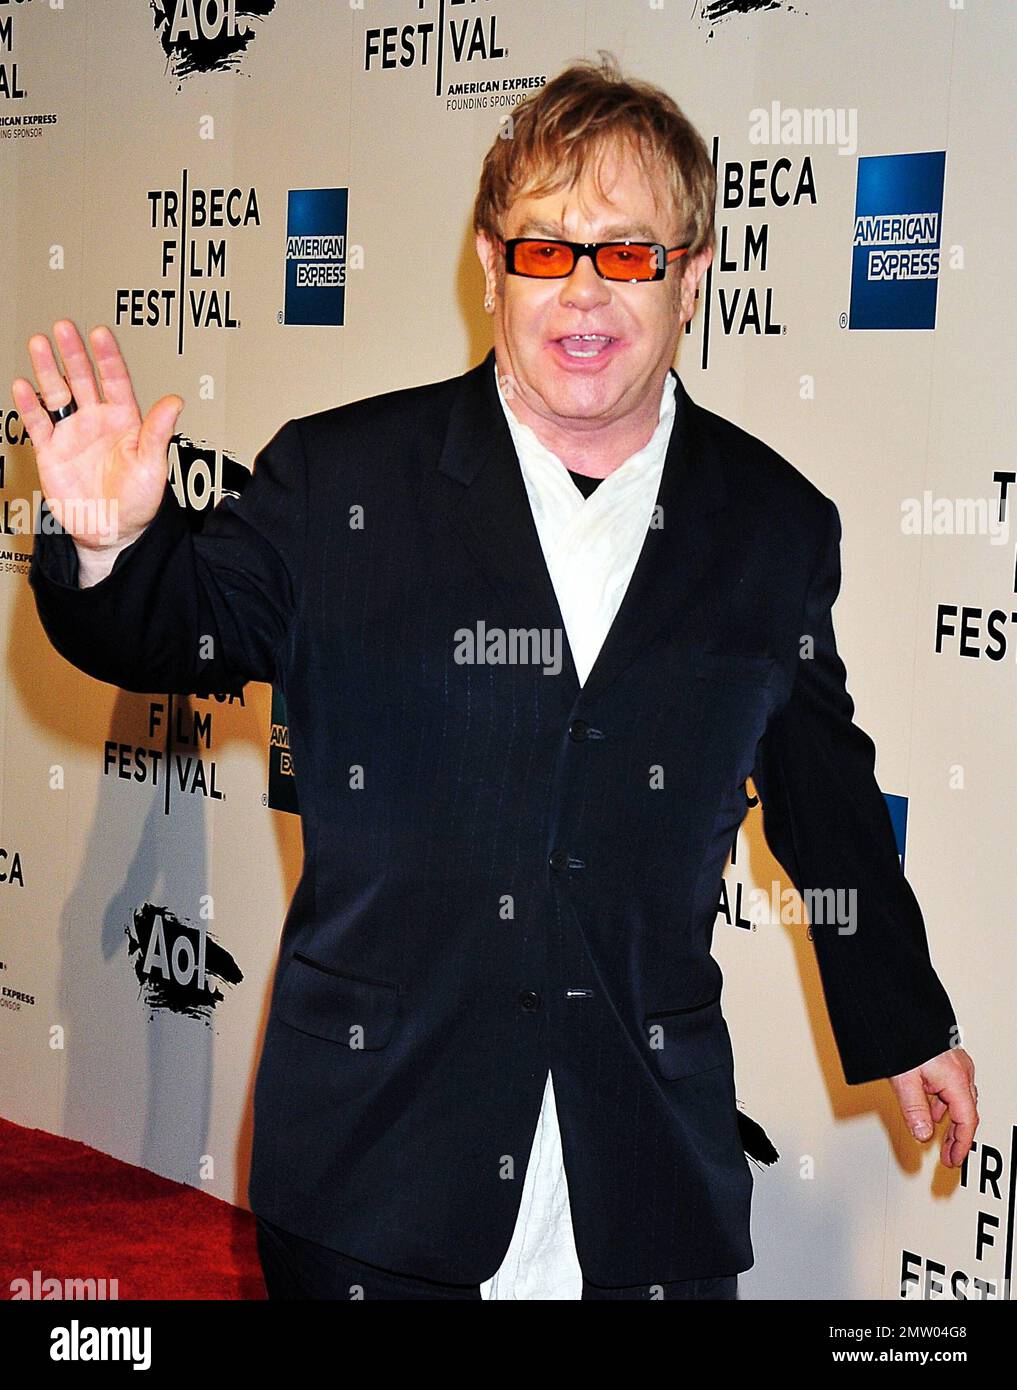 Elton John at the opening night of the Tribeca Film Festival, the world premiere of Cameron Crowe's 'The Union' featuring musical legends Elton John and Leon Russell. New York, NY. 4/20/11. Stock Photo